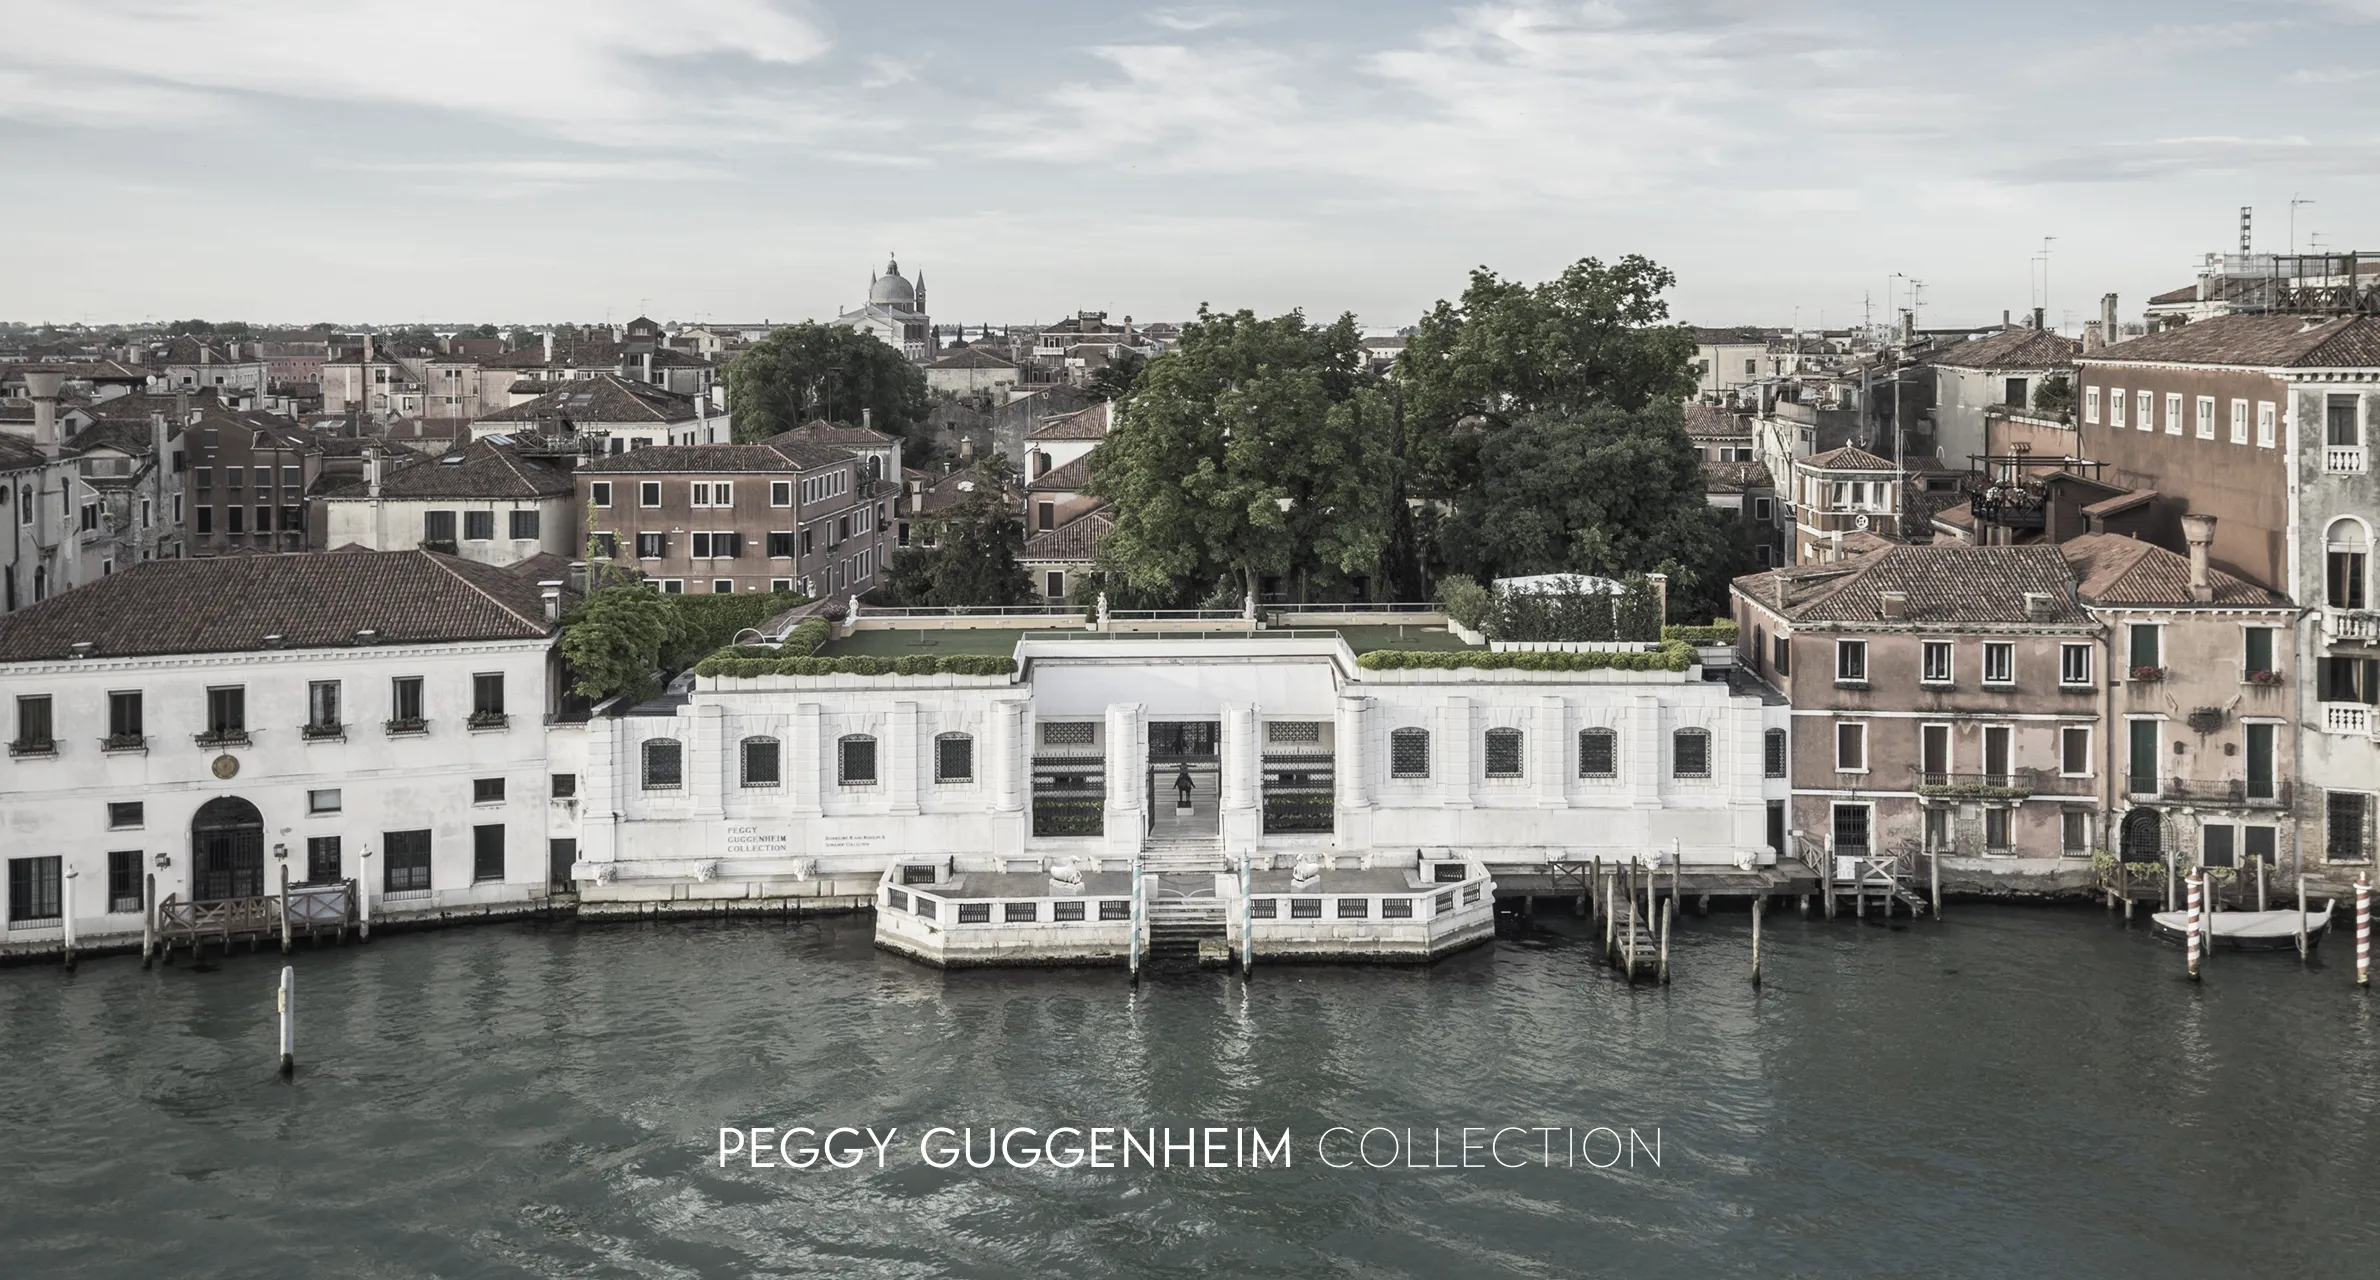 HDG - Peggy Guggenheim Collection, Venice